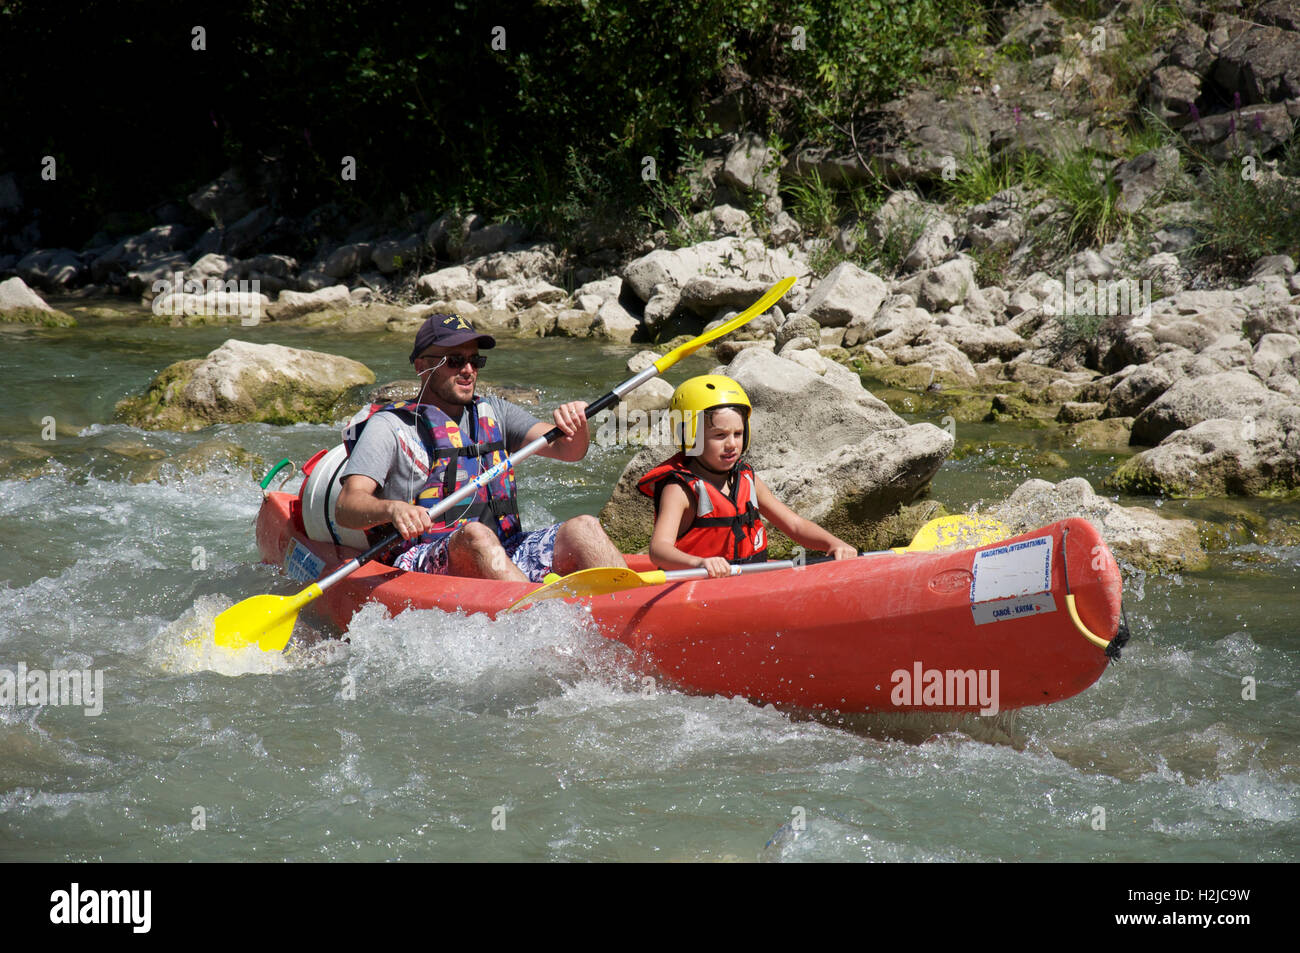 Tourism, water-sports. A father and his young son canoeing down the turbulent fast flowing waters of the Drôme River. Near Saillans, La Drôme, France. Stock Photo